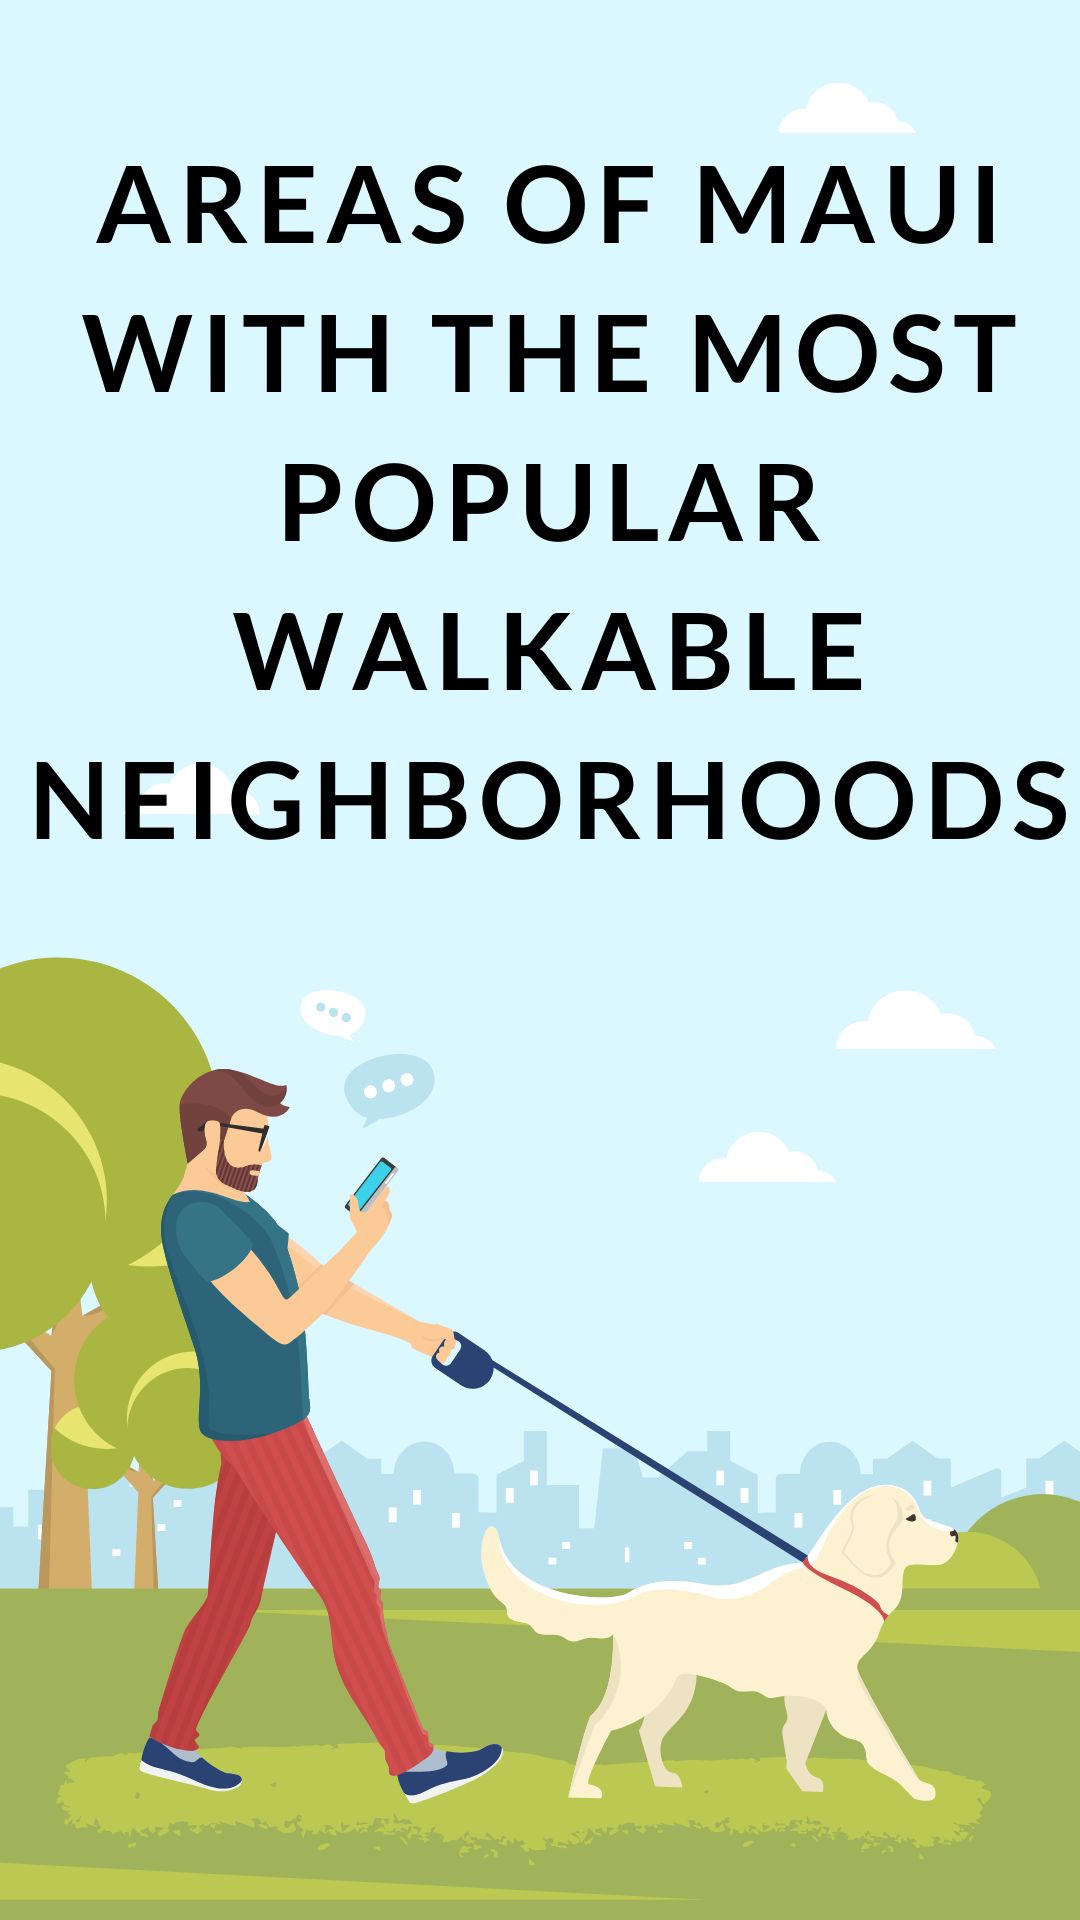 Areas of Maui with the Most Popular Walkable Neighborhoods